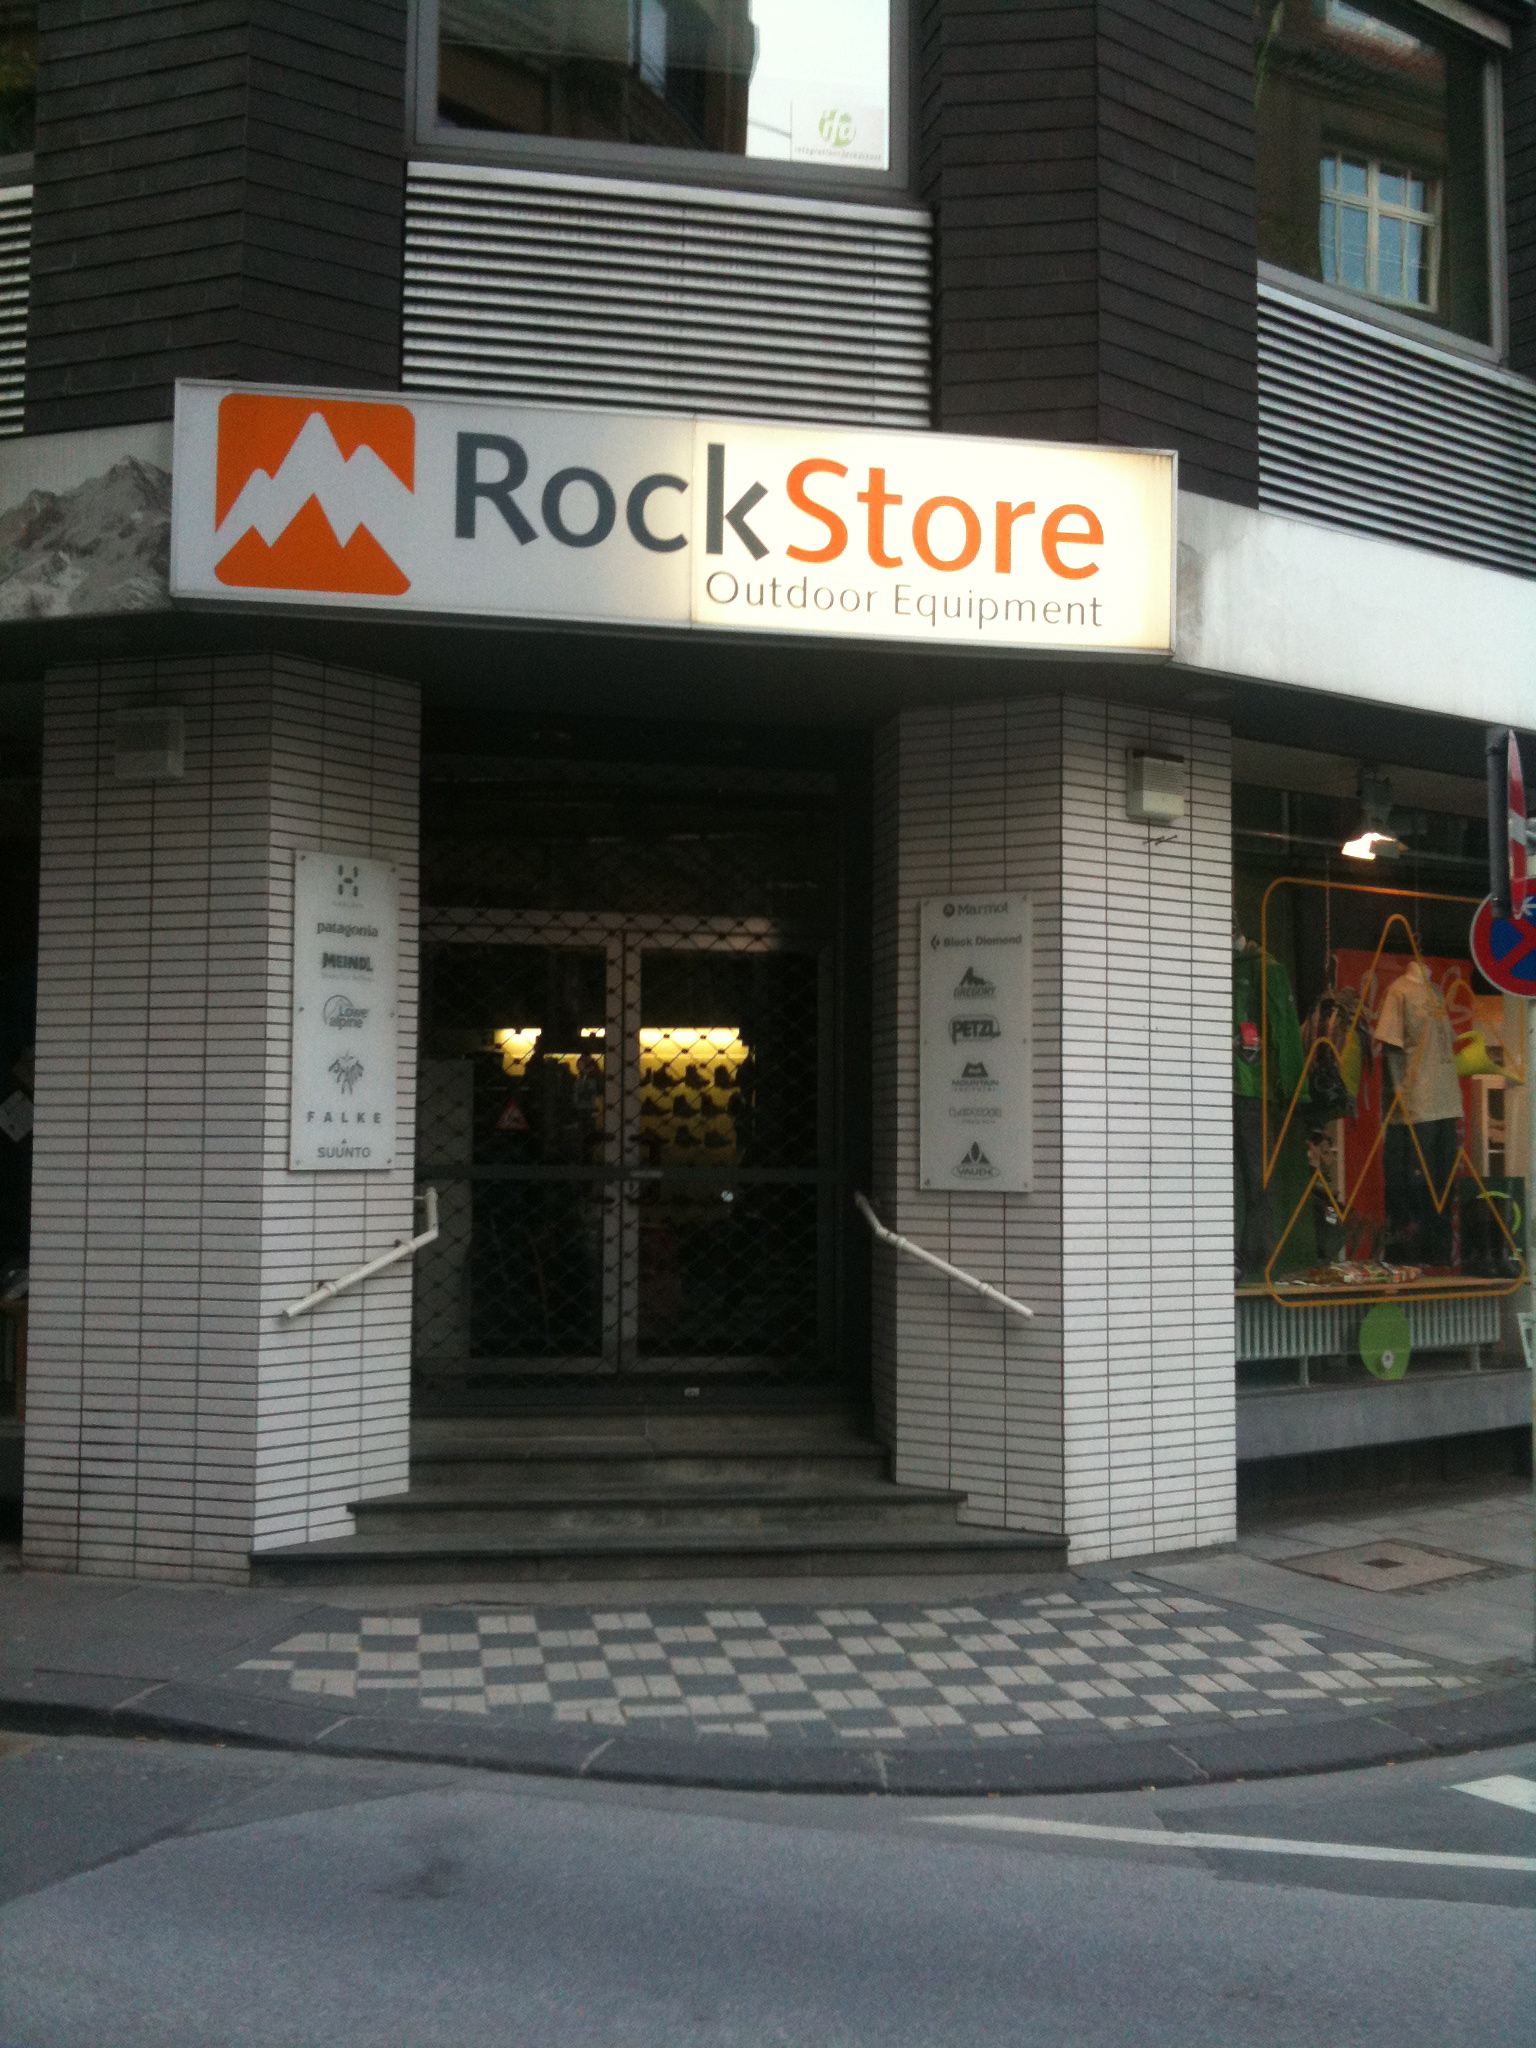 RockStore Outdoorequipment GmbH in Wuppertal